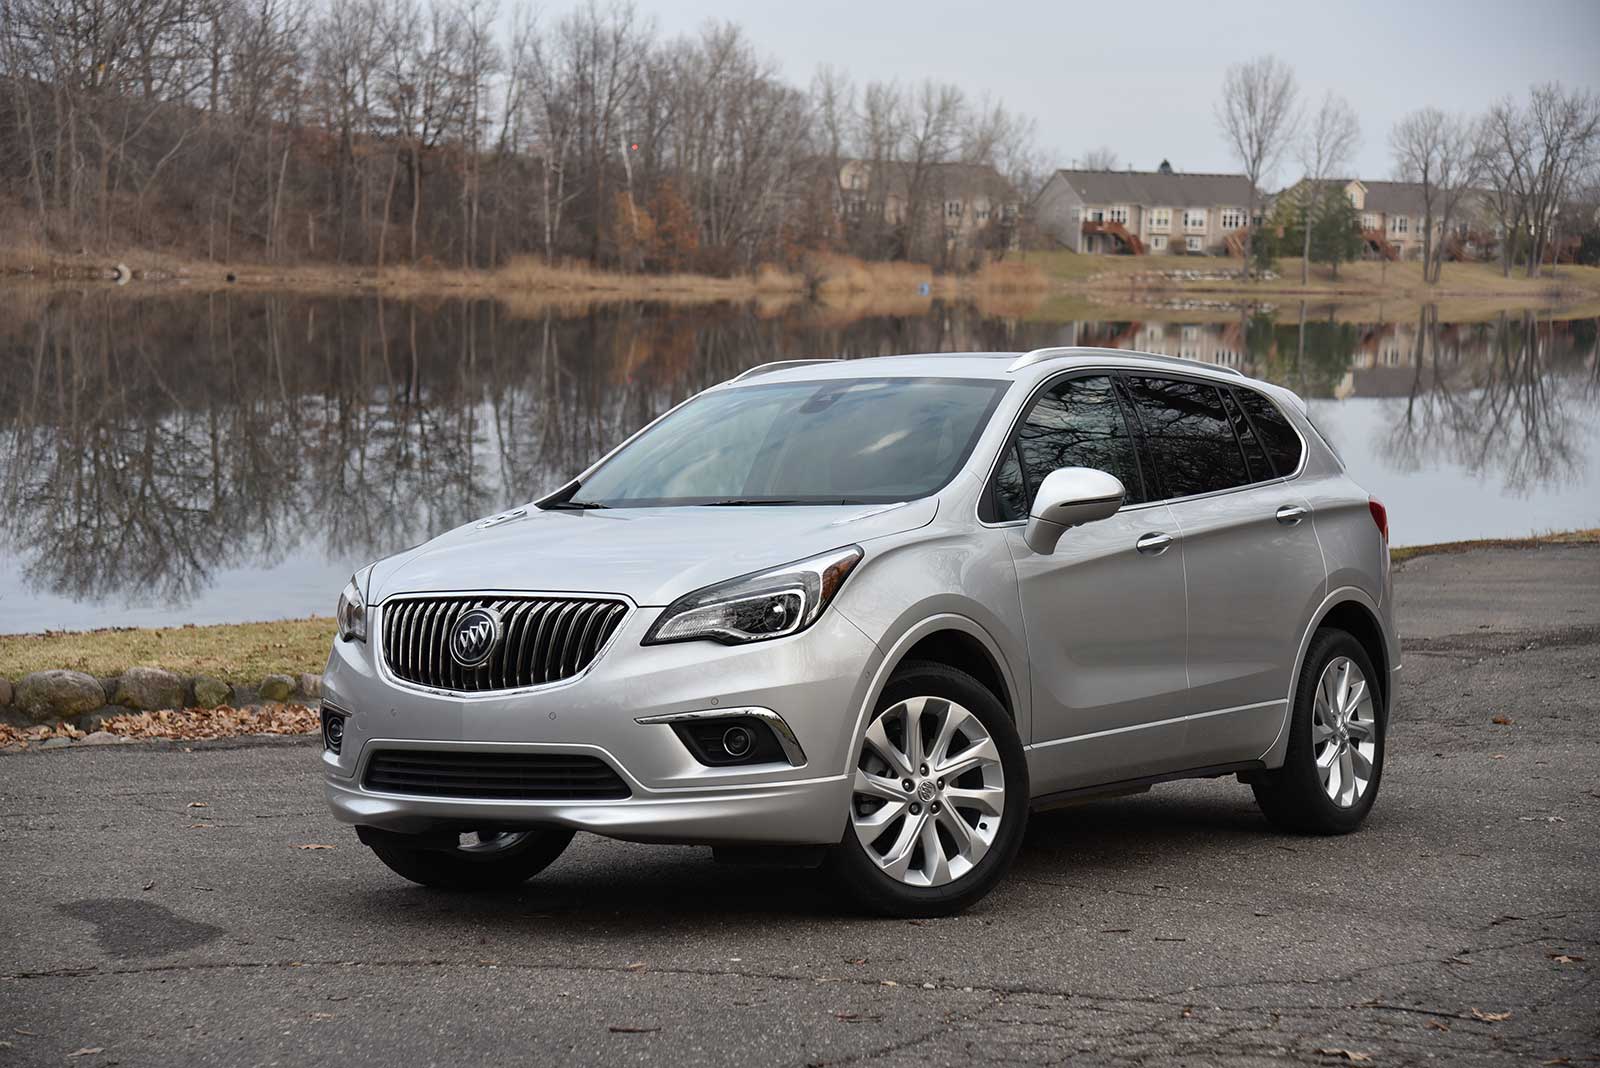 2017 Buick Envision Review: Curbed with Craig Cole - AutoGuide.com